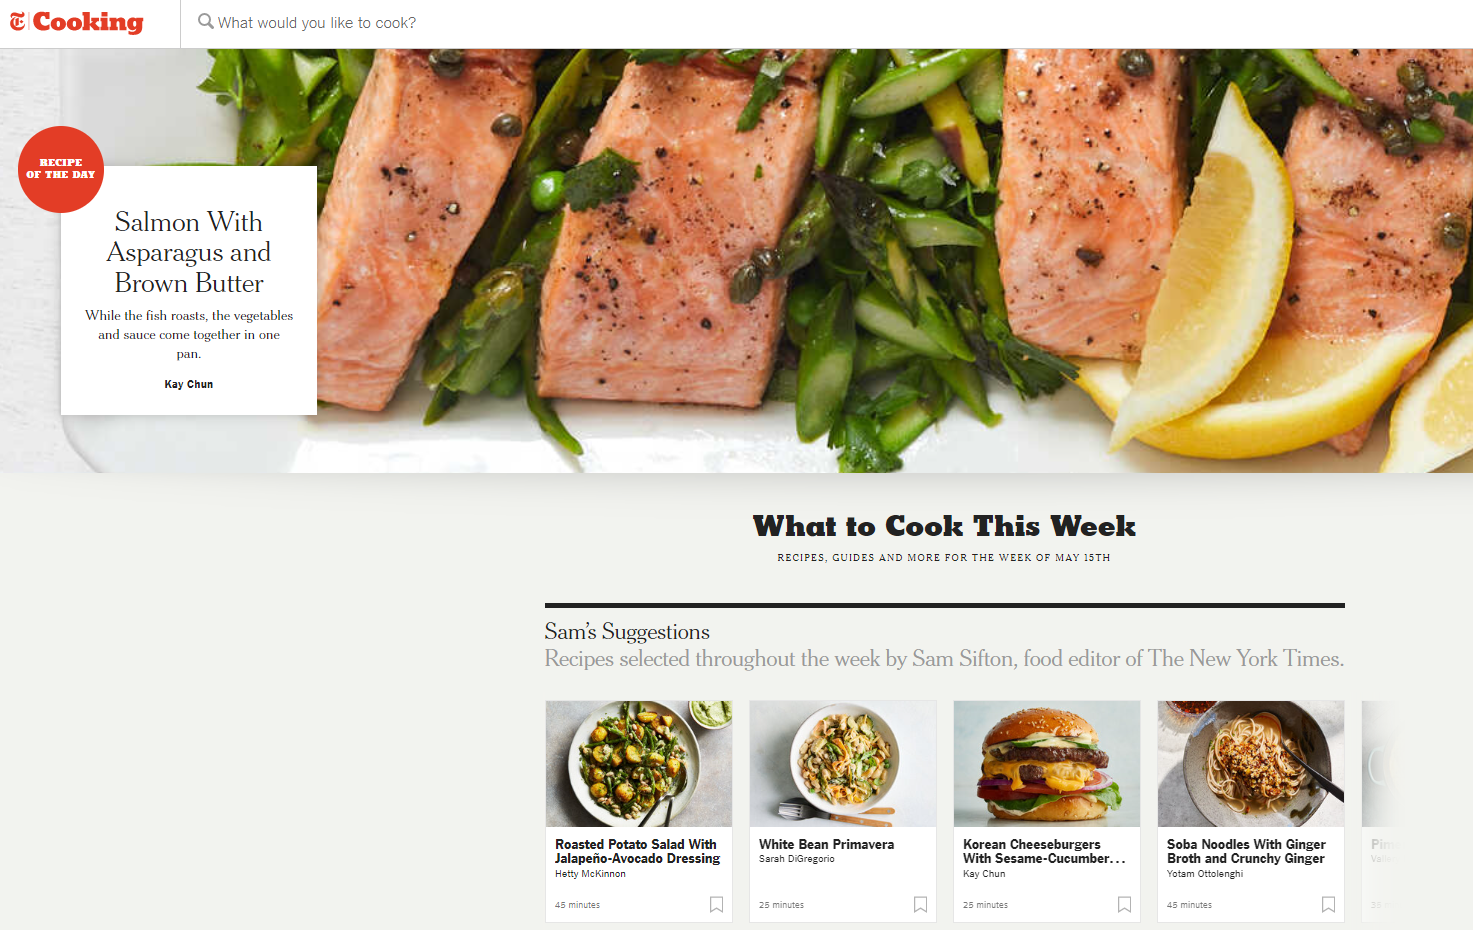 The NYT Cooking recipe website has recipes for various occasions and tips for beginners